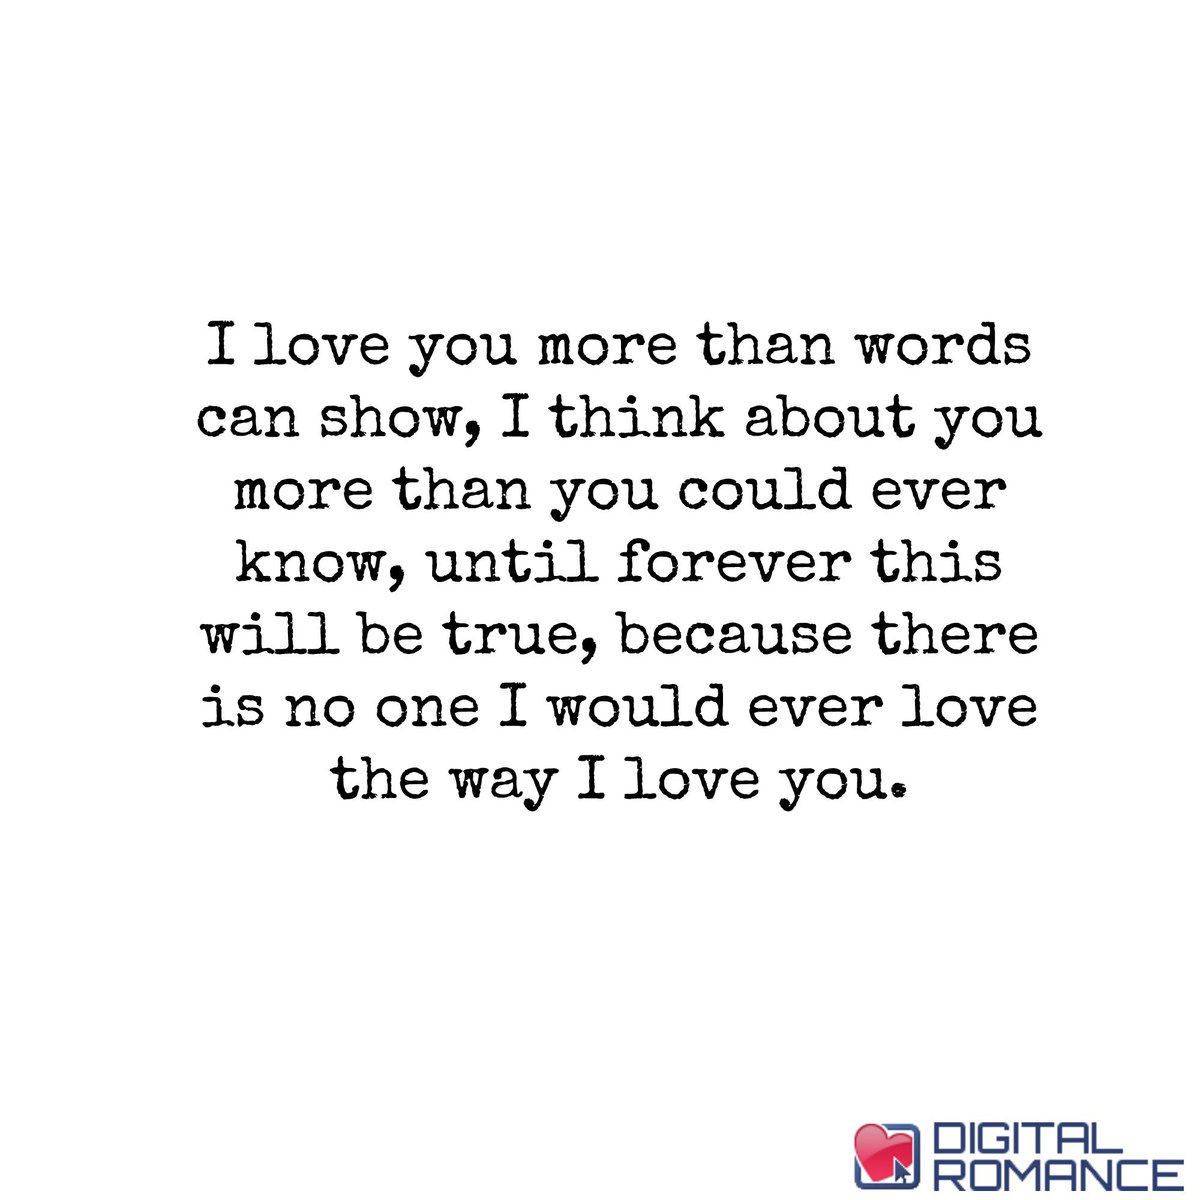 Digital Romance Inc I Love You More Than Words Can Show I Think About You More Than You Could Ever Know Until Forever This Will Be True Love Quotes T Co Udndfissia